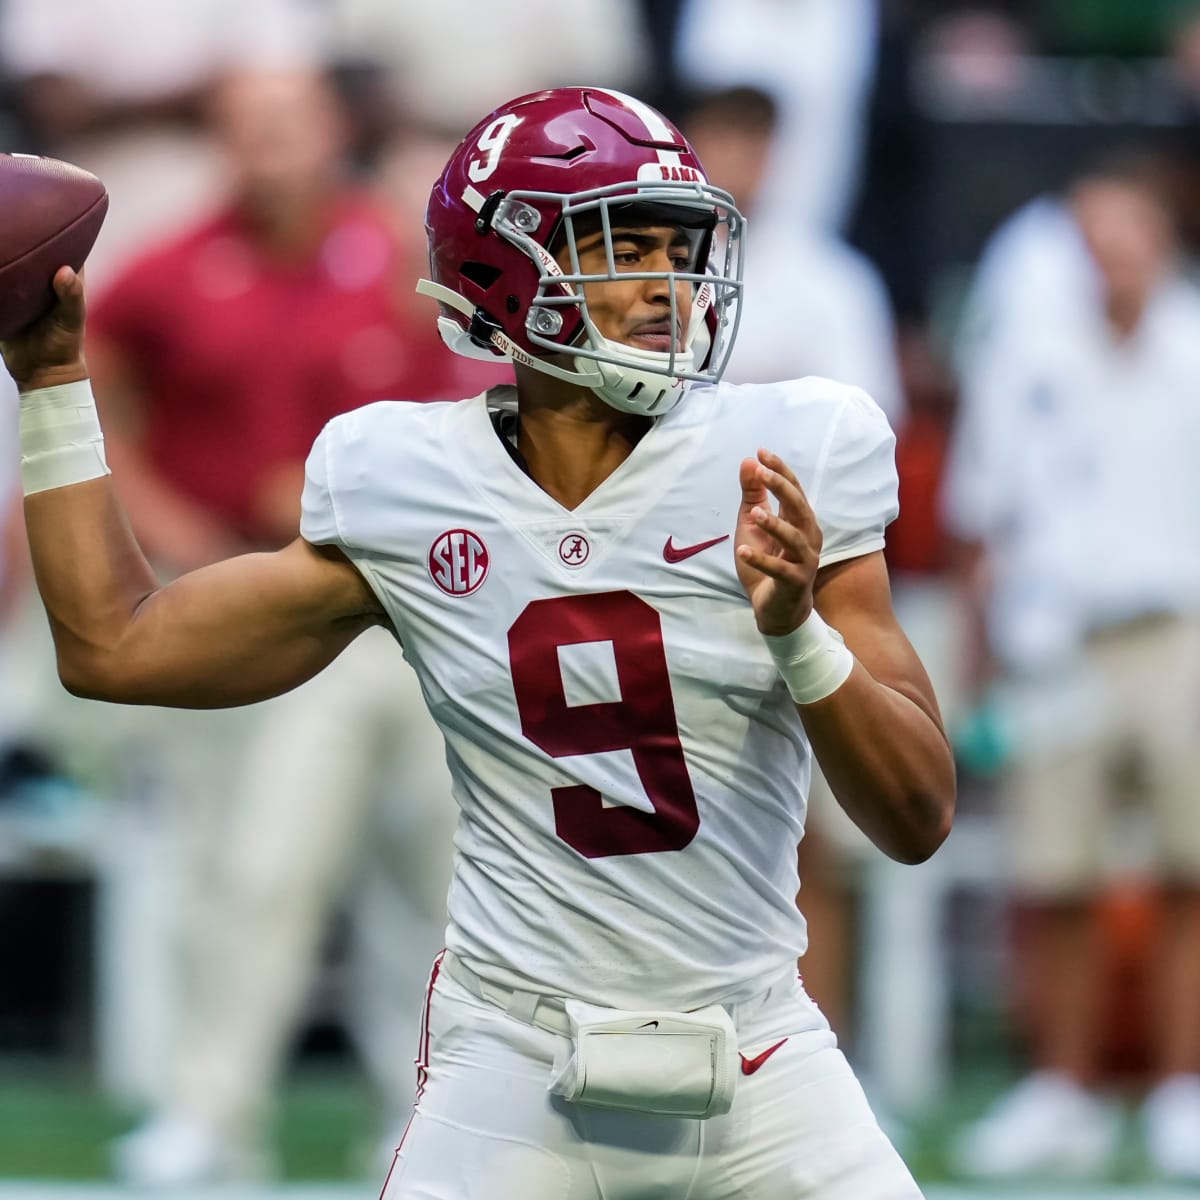 2023 NFL Mock Draft 1.0: Bryce Young Leads Quarterback Revival